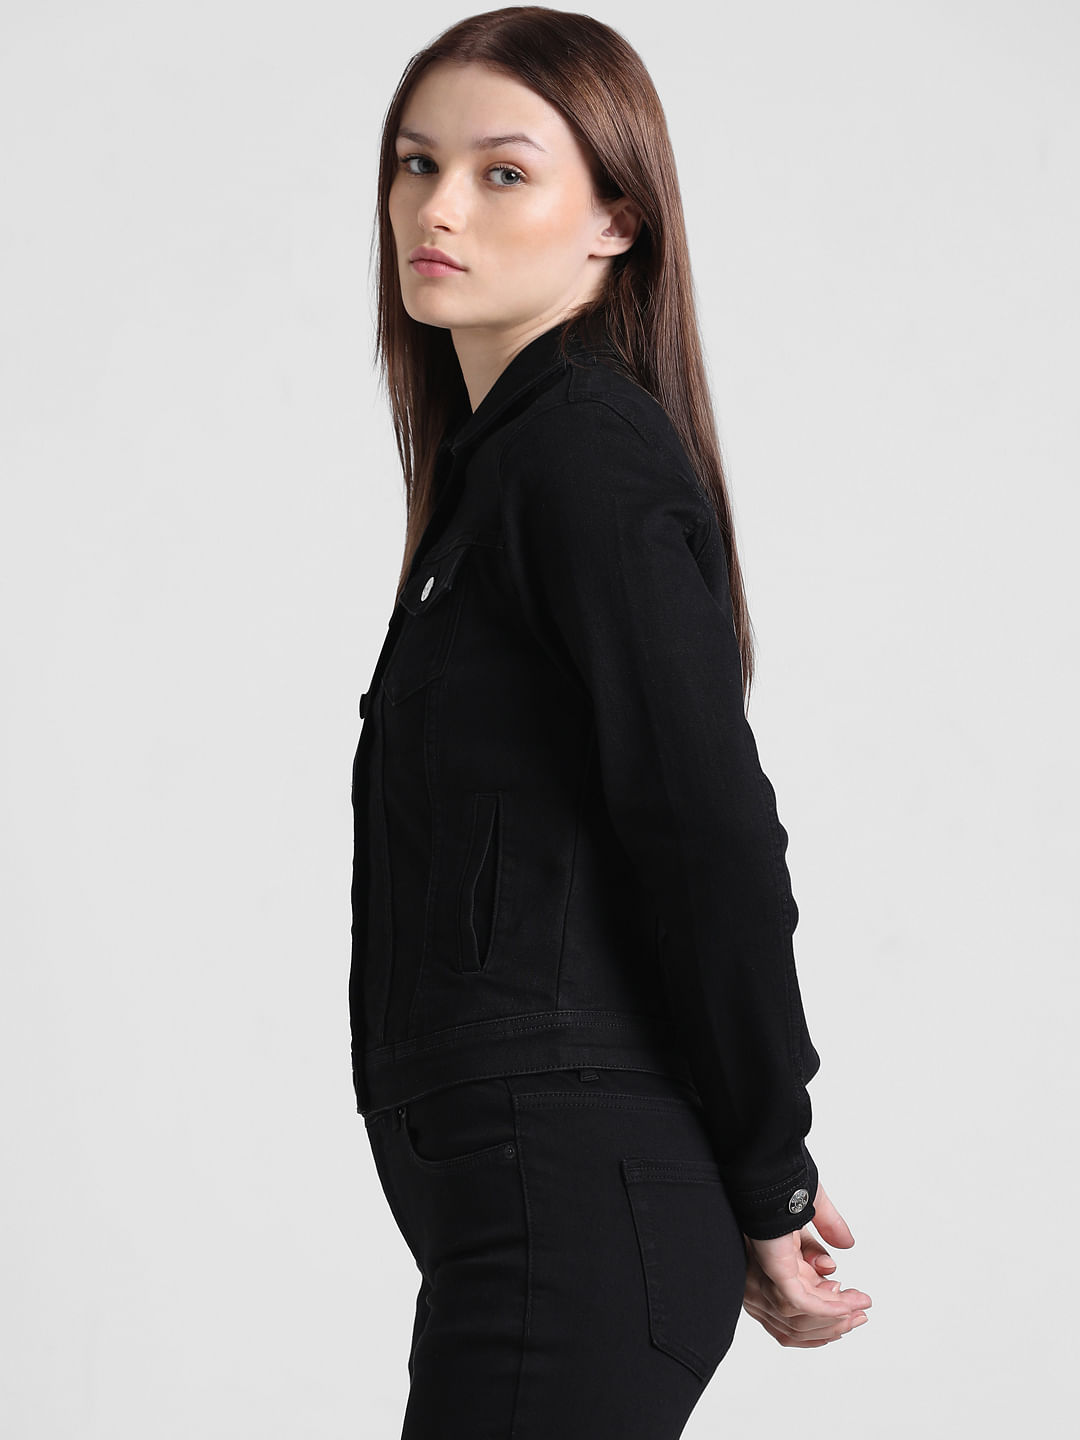 Buy Blue Jackets & Coats for Women by High Star Online | Ajio.com